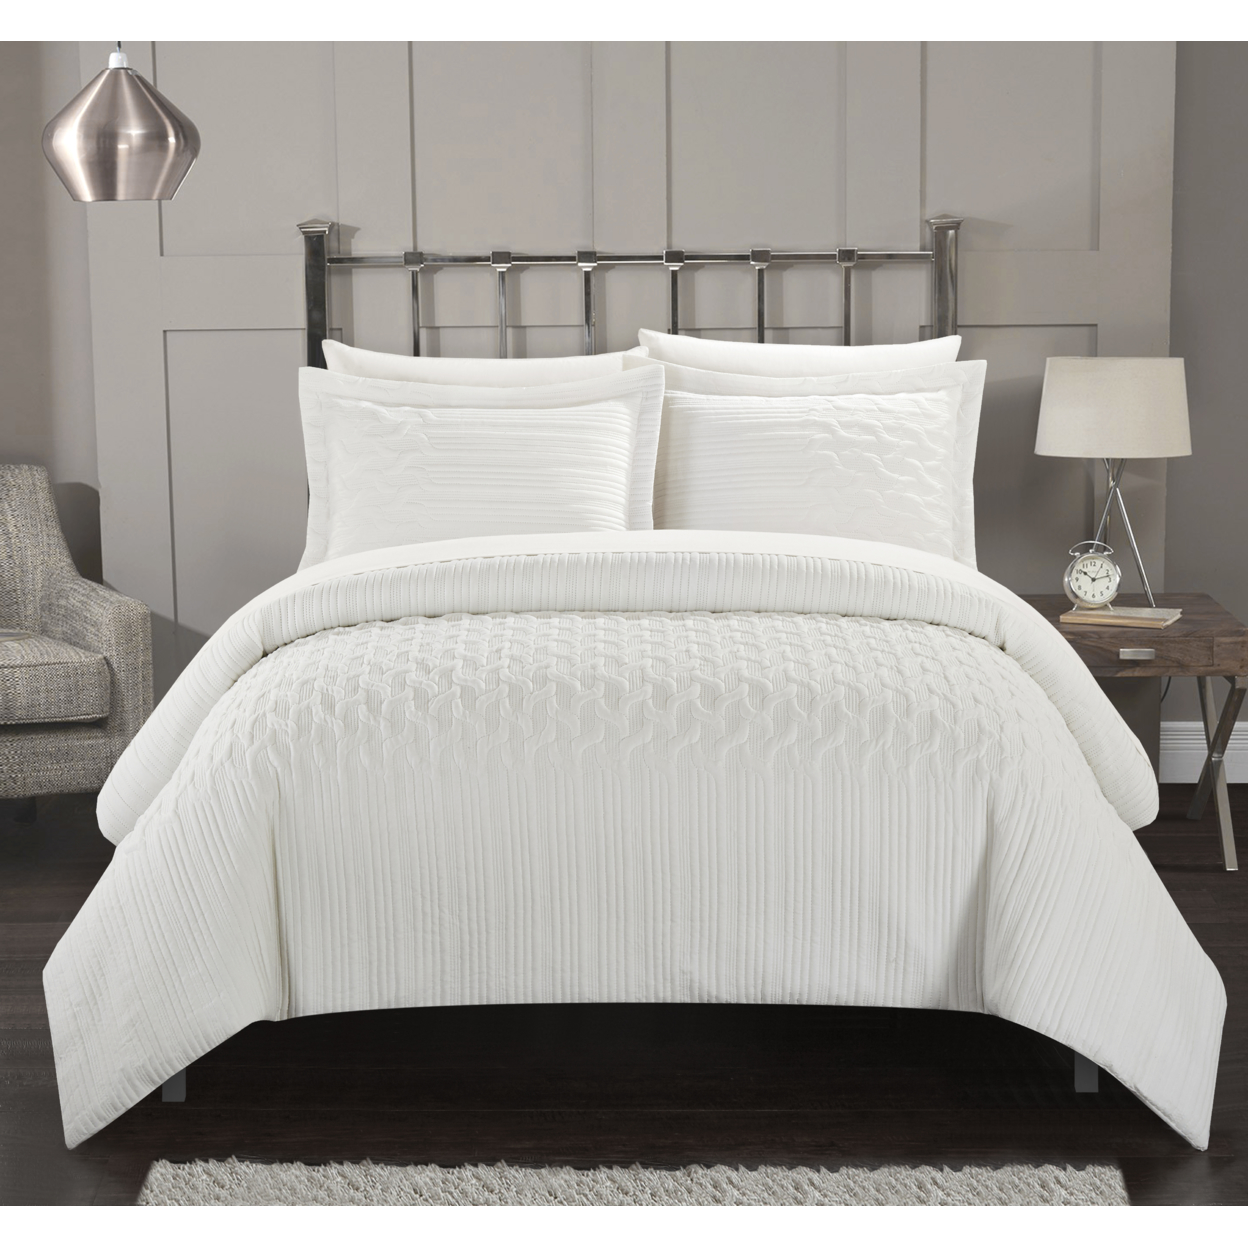 Jazmaine 3 Or 2 Piece Comforter Set Embossed Embroidered Quilted Geometric Vine Pattern Bedding - White, Twin